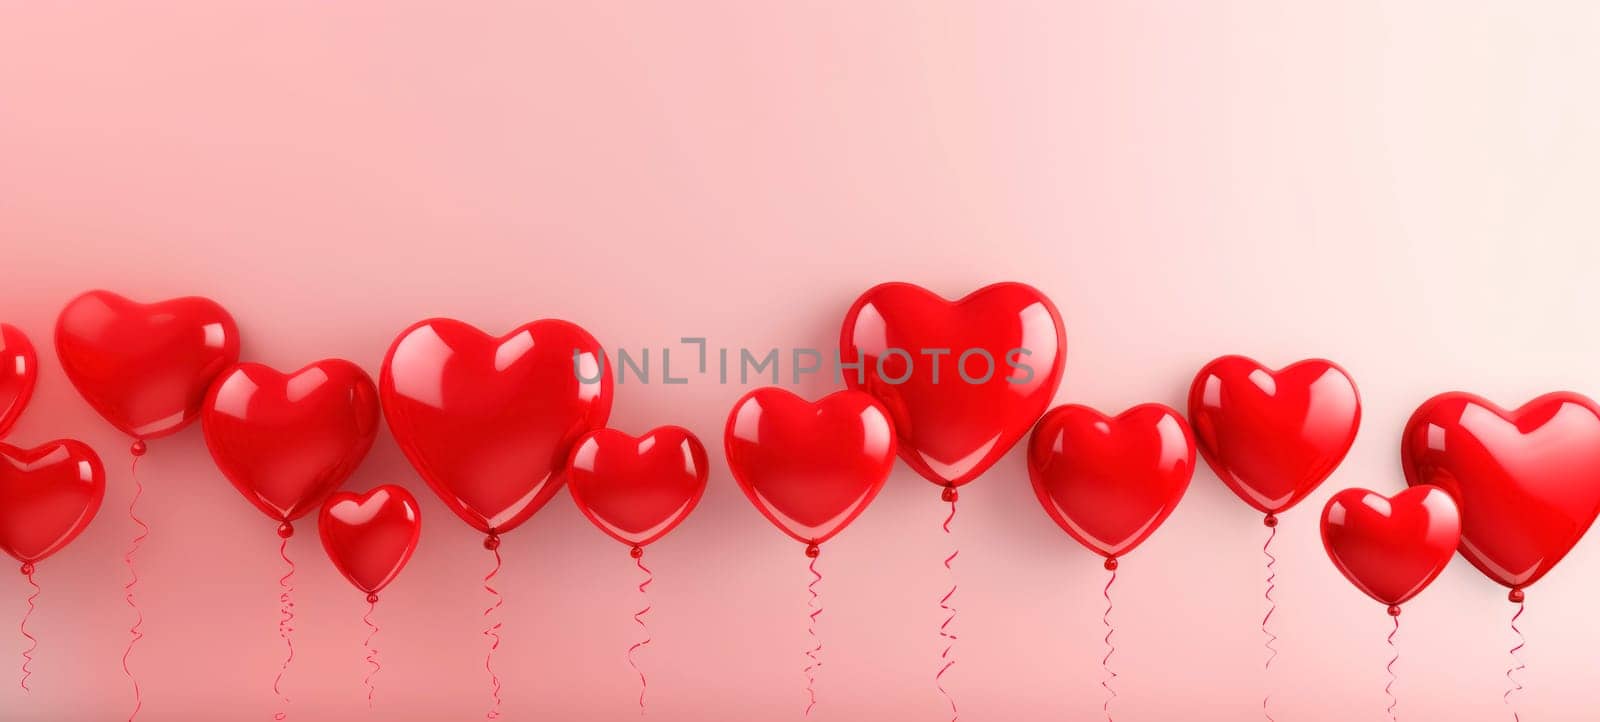 Shiny red heart-shaped balloons with elegant ribbons floating against a pastel pink backdrop for a romantic celebration.